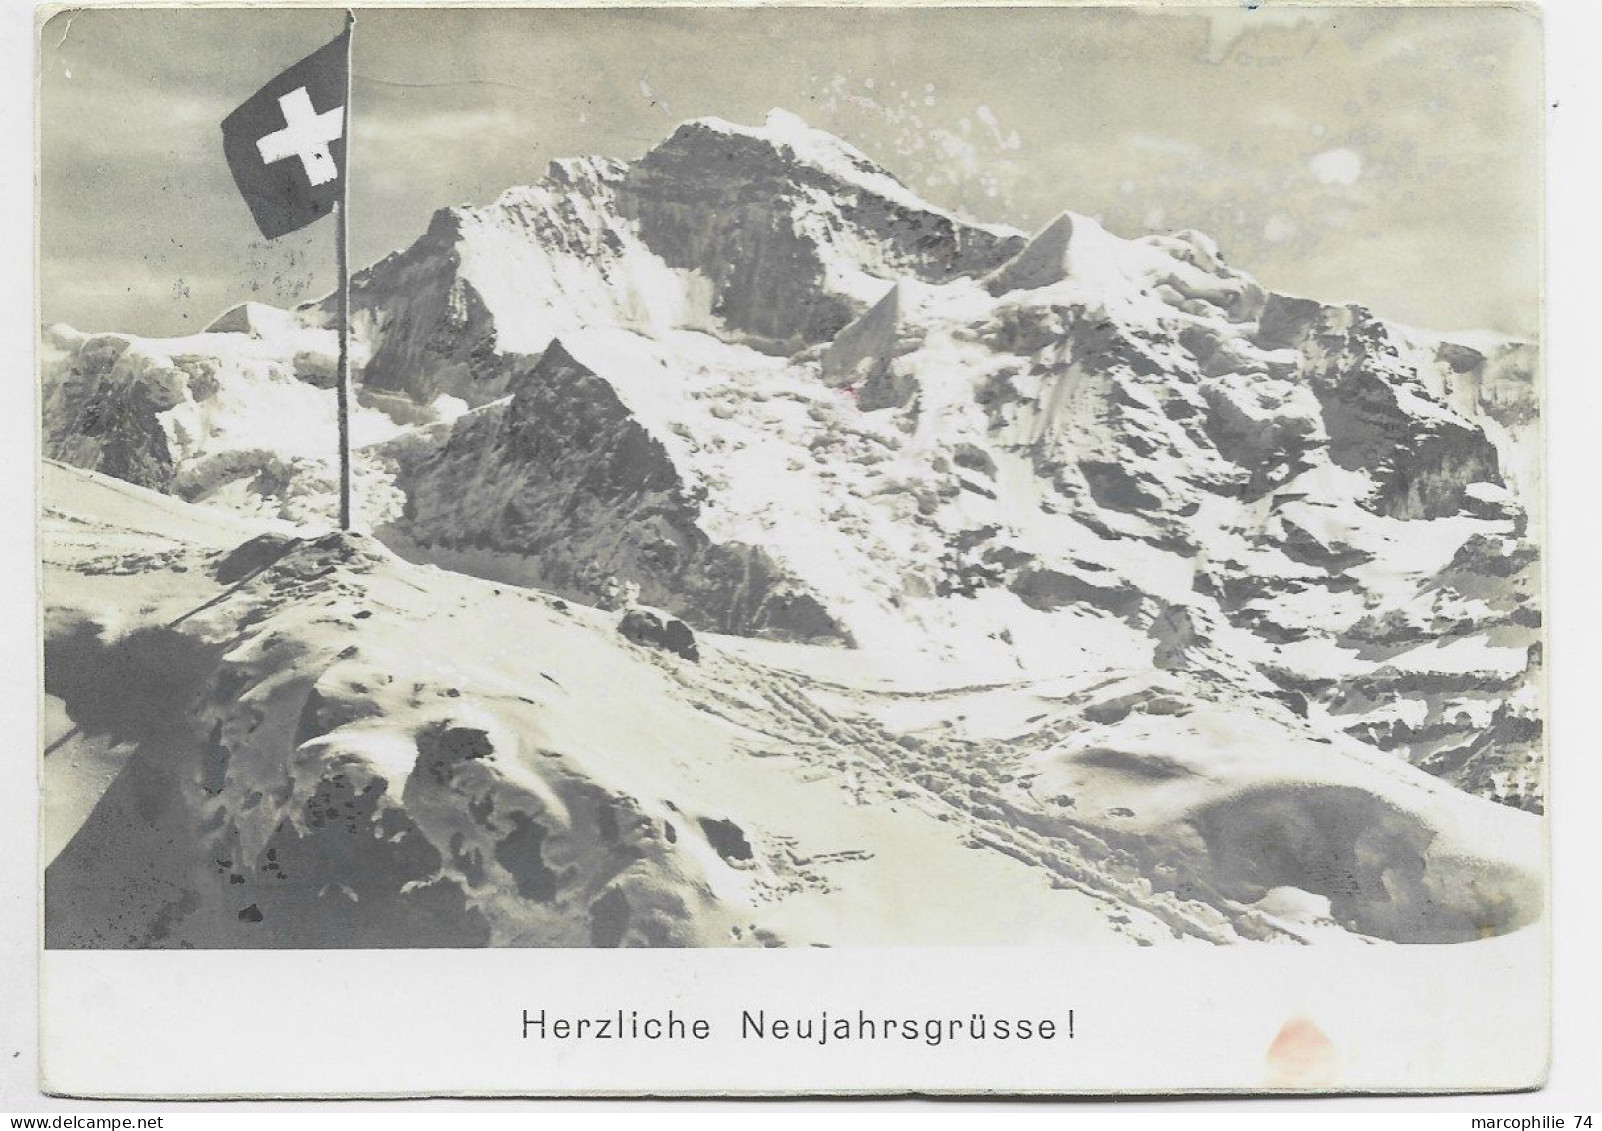 PRO JUVENTUTE SUISSE 5C SOLO CARTE BERN 1943 TO SUEDE SWEDEN CENSURE NAZI AIGLE - Covers & Documents